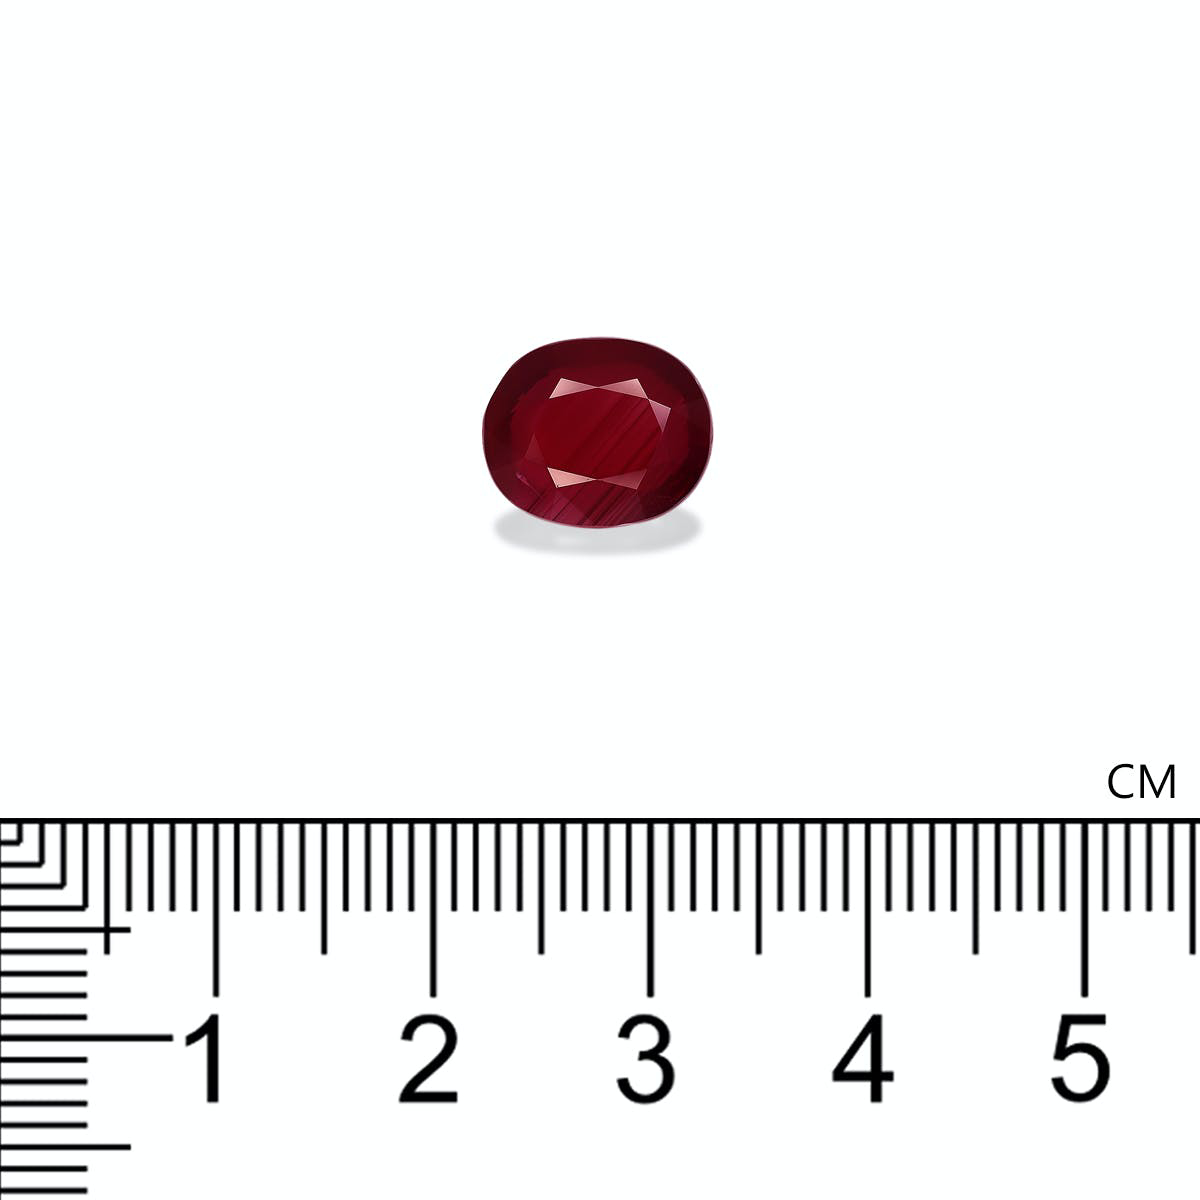 Picture of Unheated Mozambique Ruby 5.06ct - 10x8mm (D6-06)